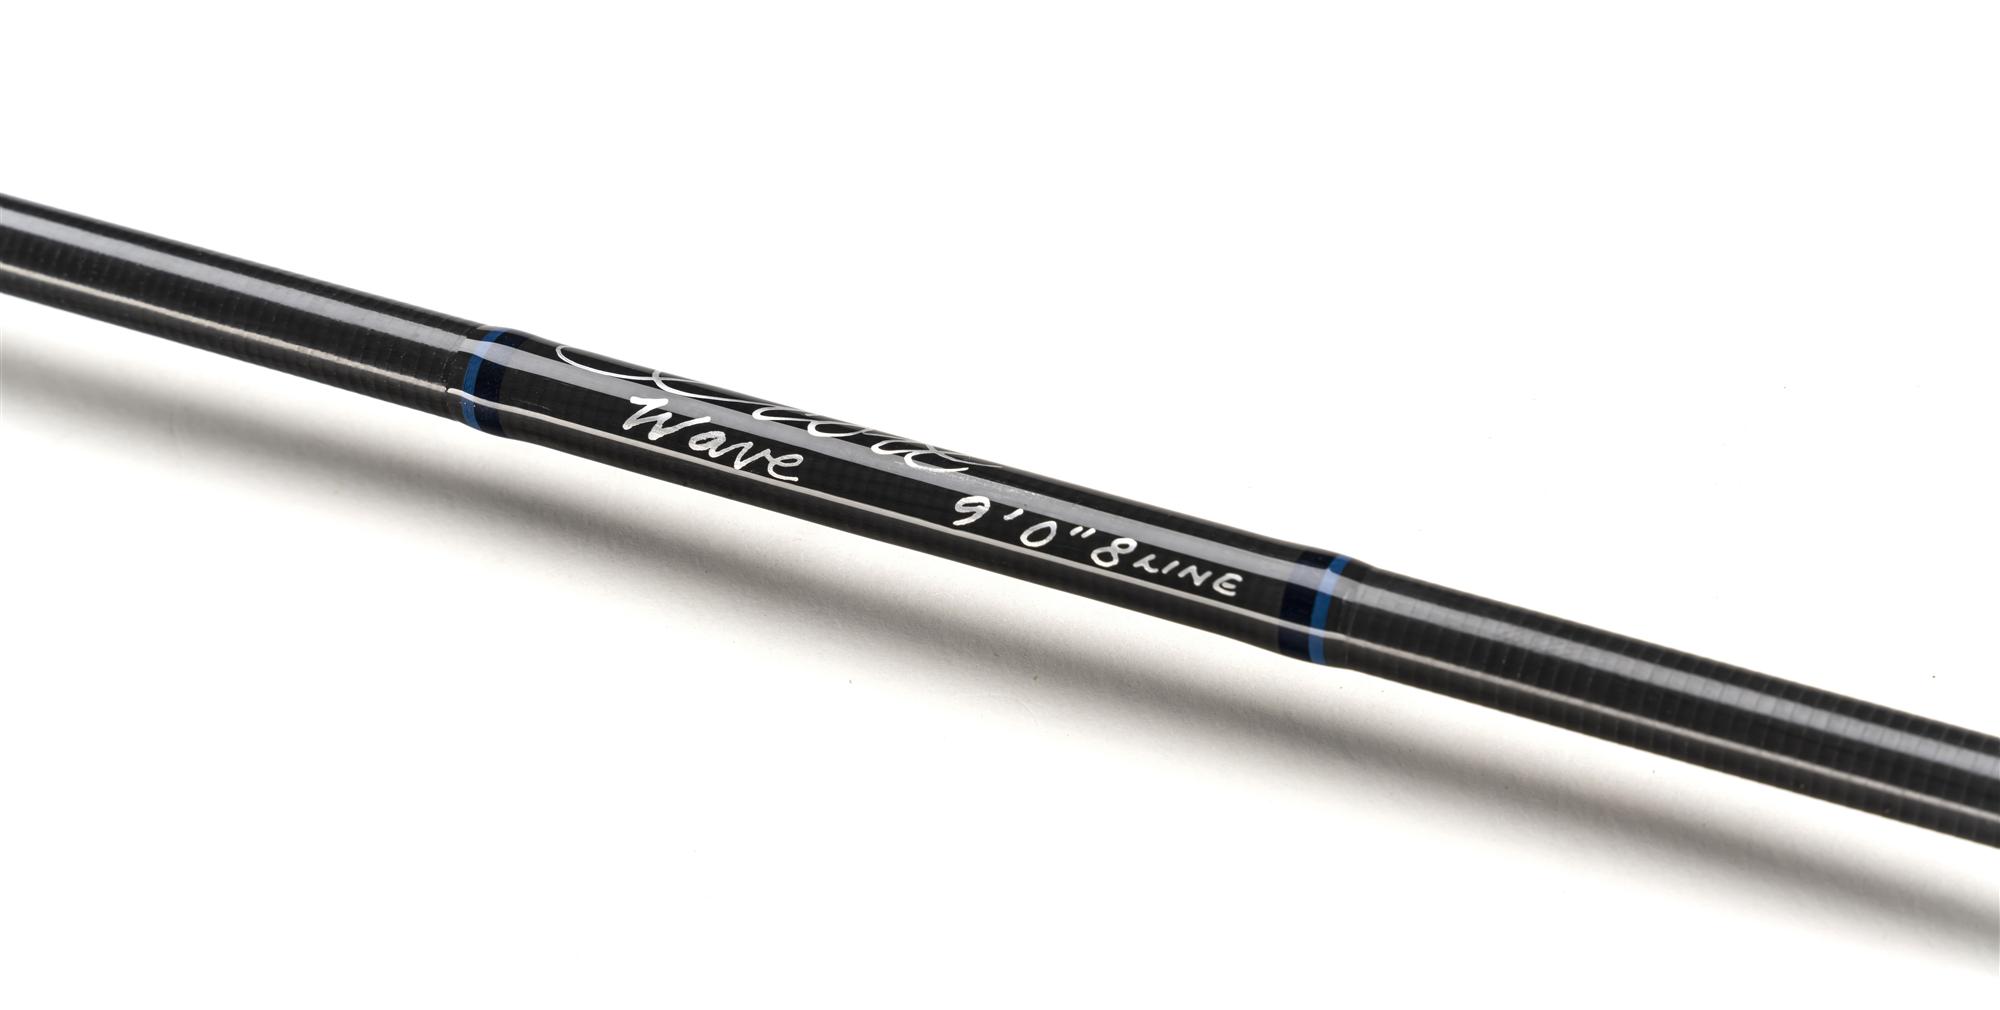 Scott Wave Fly Rod, engineered for peak performance with cutting-edge technology for all water conditions.